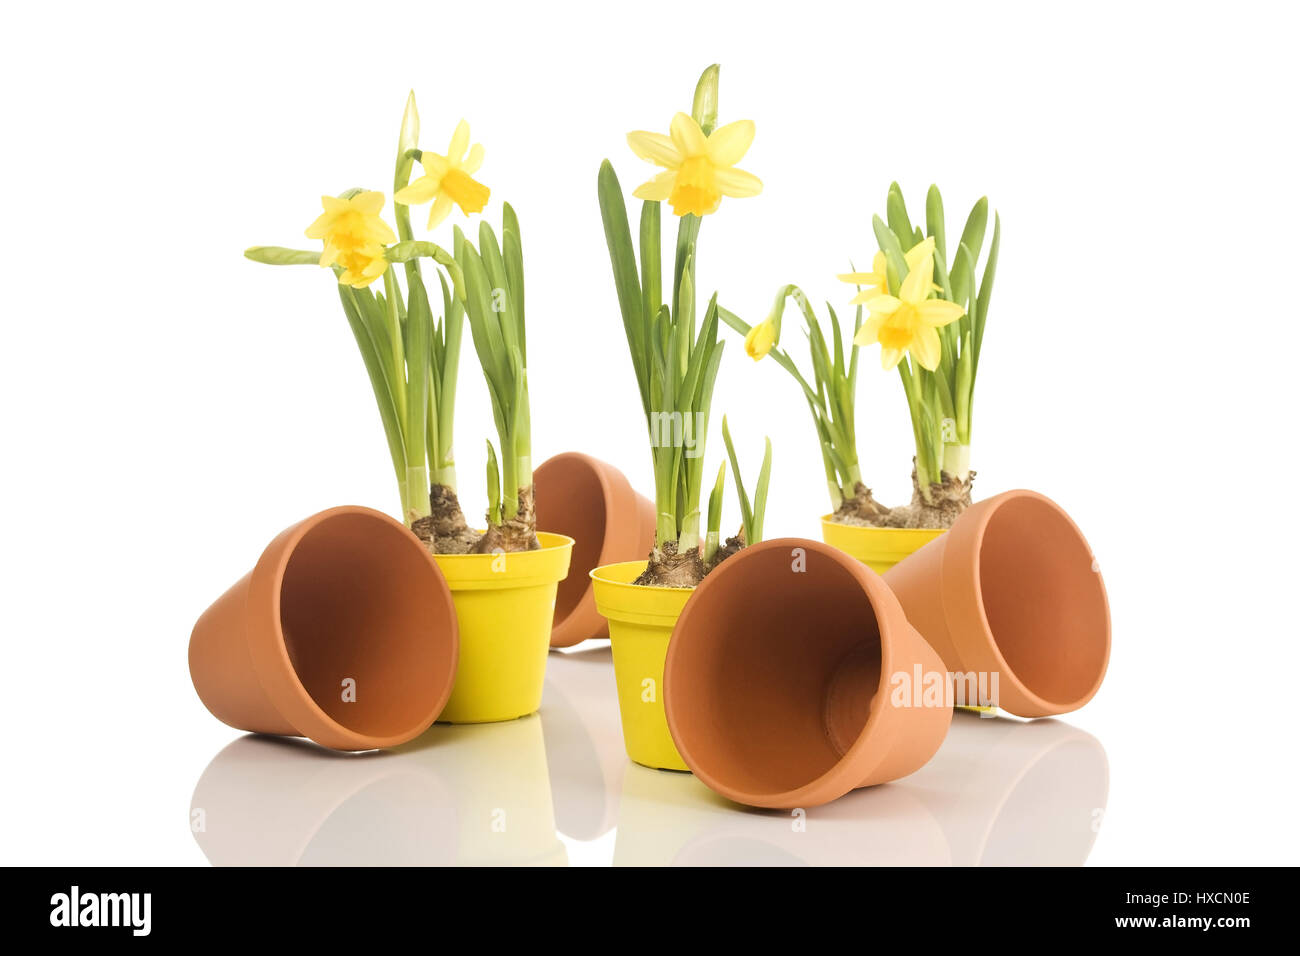 Narcissi with flowerpots, Daffodils with of flower pot |, Narzissen mit Blumentöpfen |Daffodils with flower pots| Stock Photo